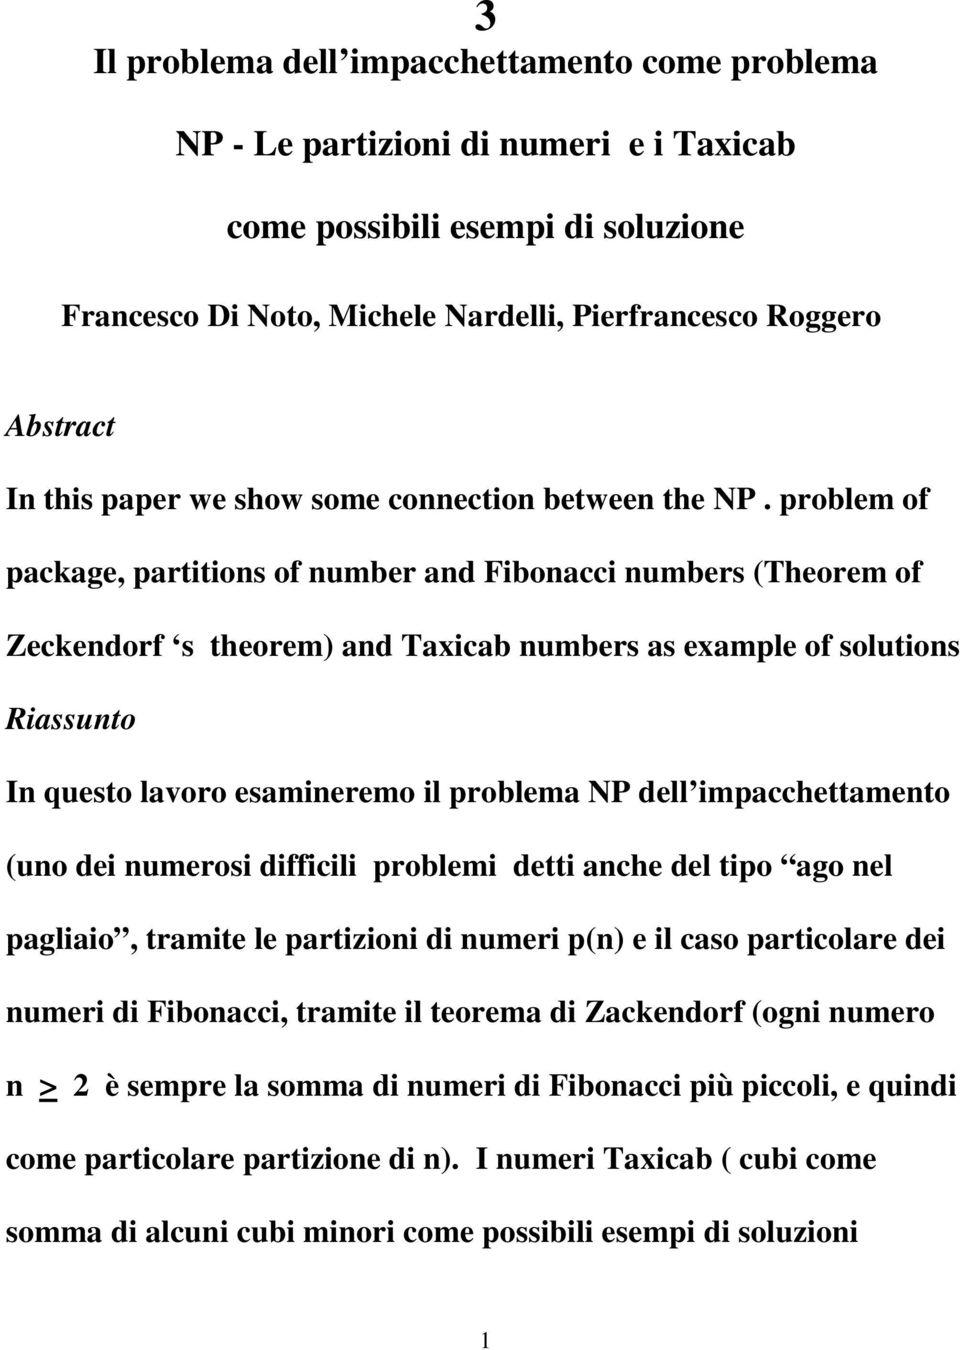 problem of package, partitions of number and Fibonacci numbers (Theorem of Zeckendorf s theorem) and Taxicab numbers as example of solutions Riassunto In questo lavoro esamineremo il problema NP dell